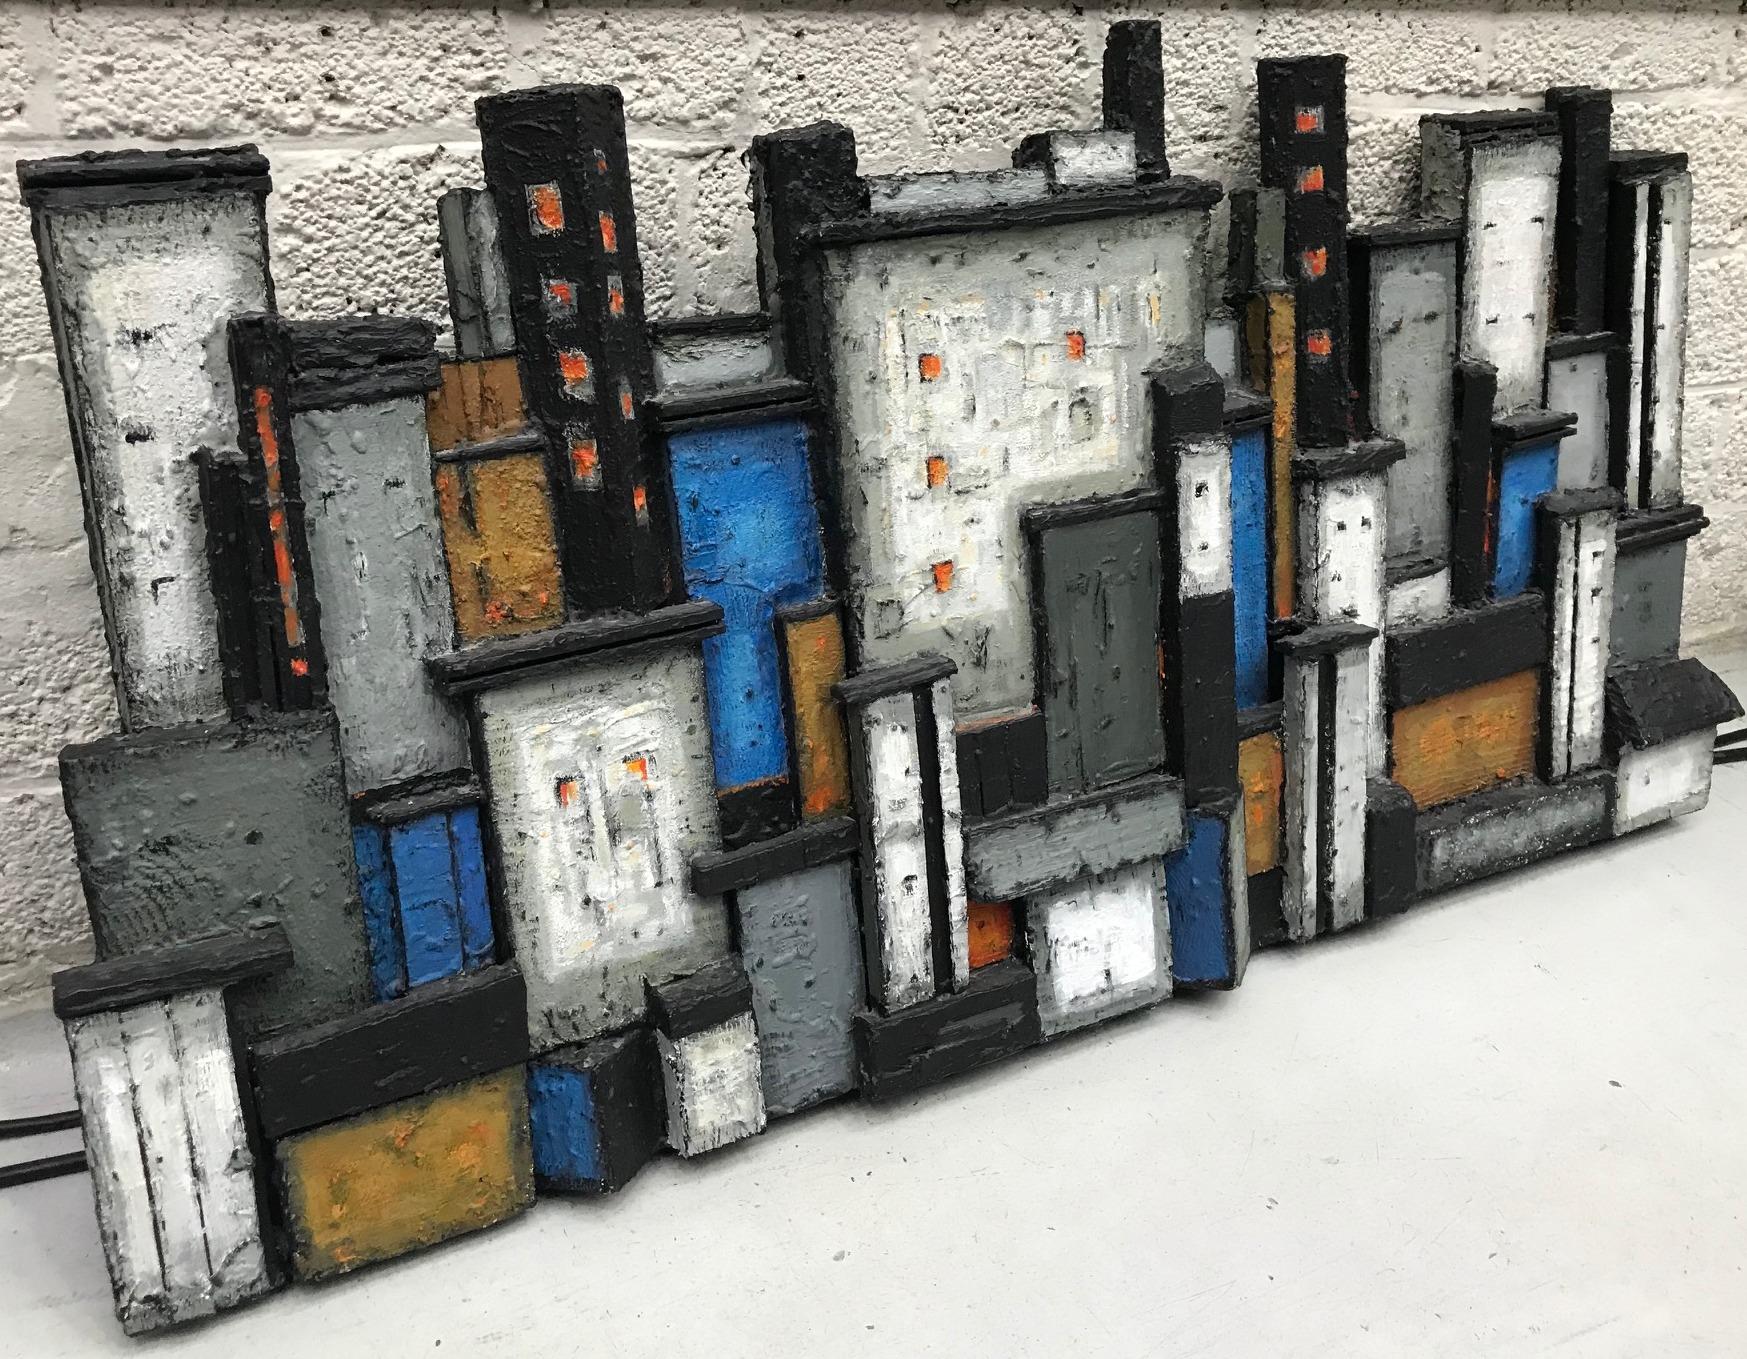 Skyline cityscape wall relief build in blocks of rough textured wood and painted in black, white, orange & blue is made from the perspective of the waterfront river side. It is made and signed by the Scandinavian artist Dorrit Kahler in the